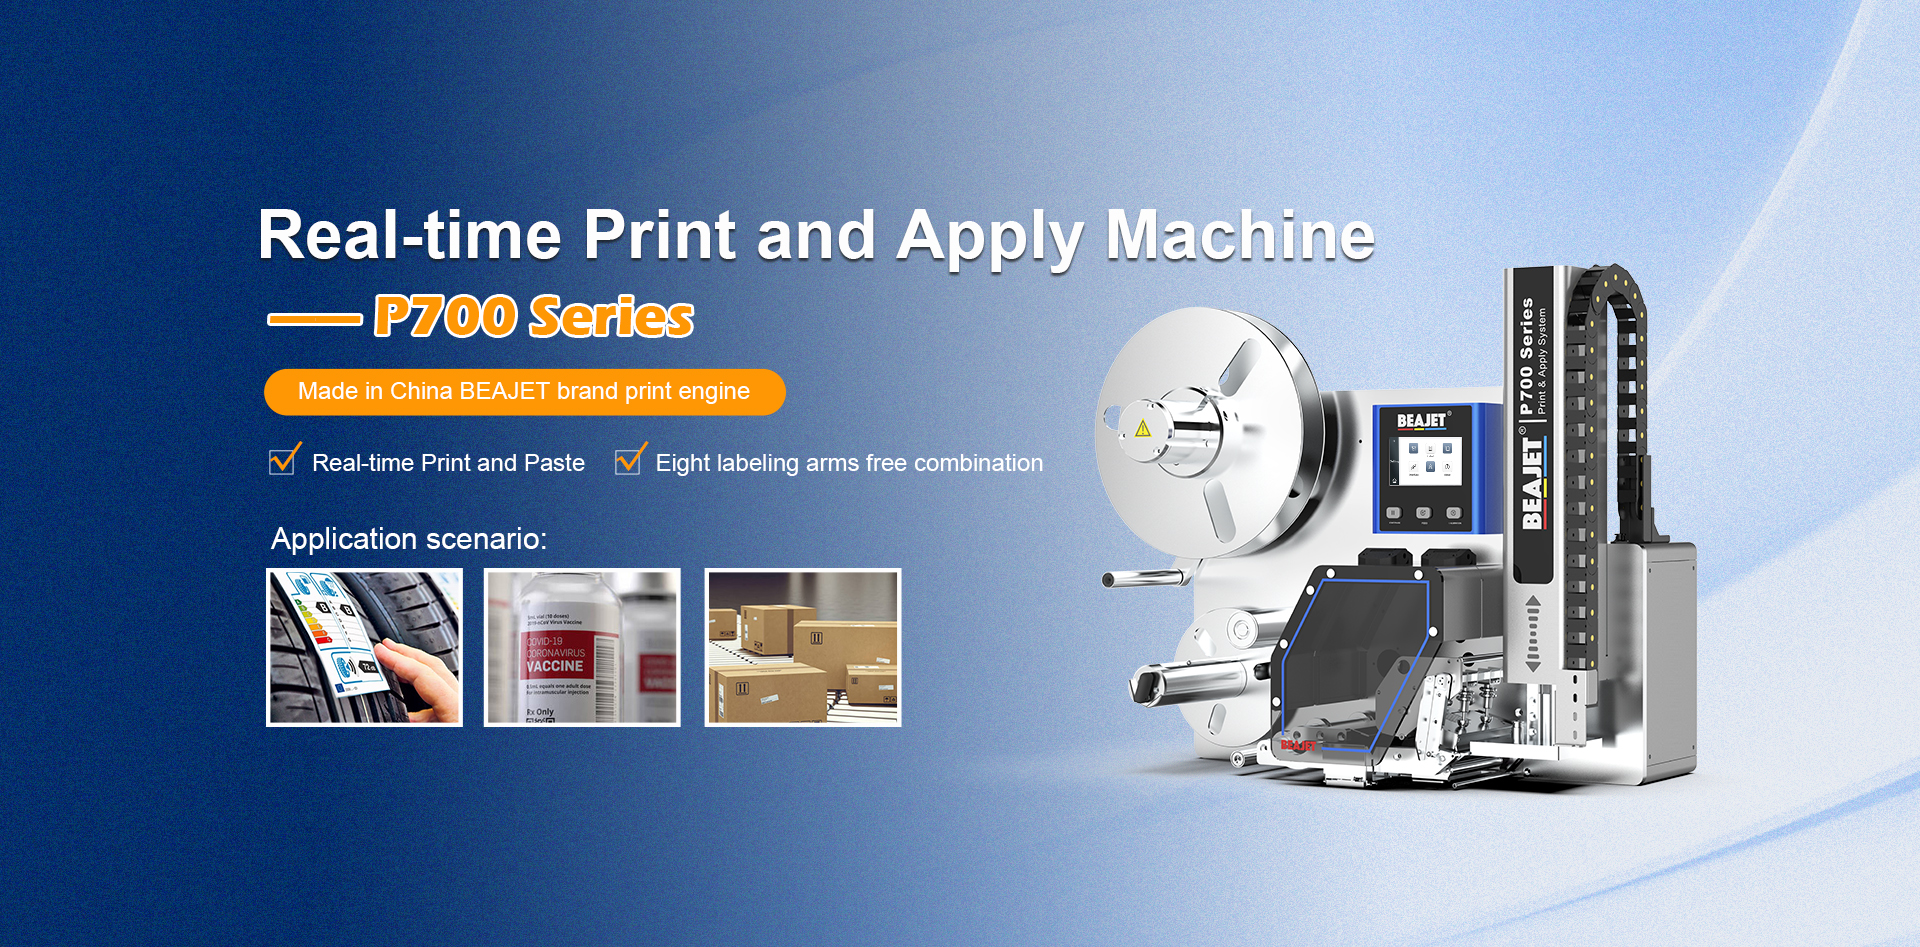 Real-time Print and Apply Machine